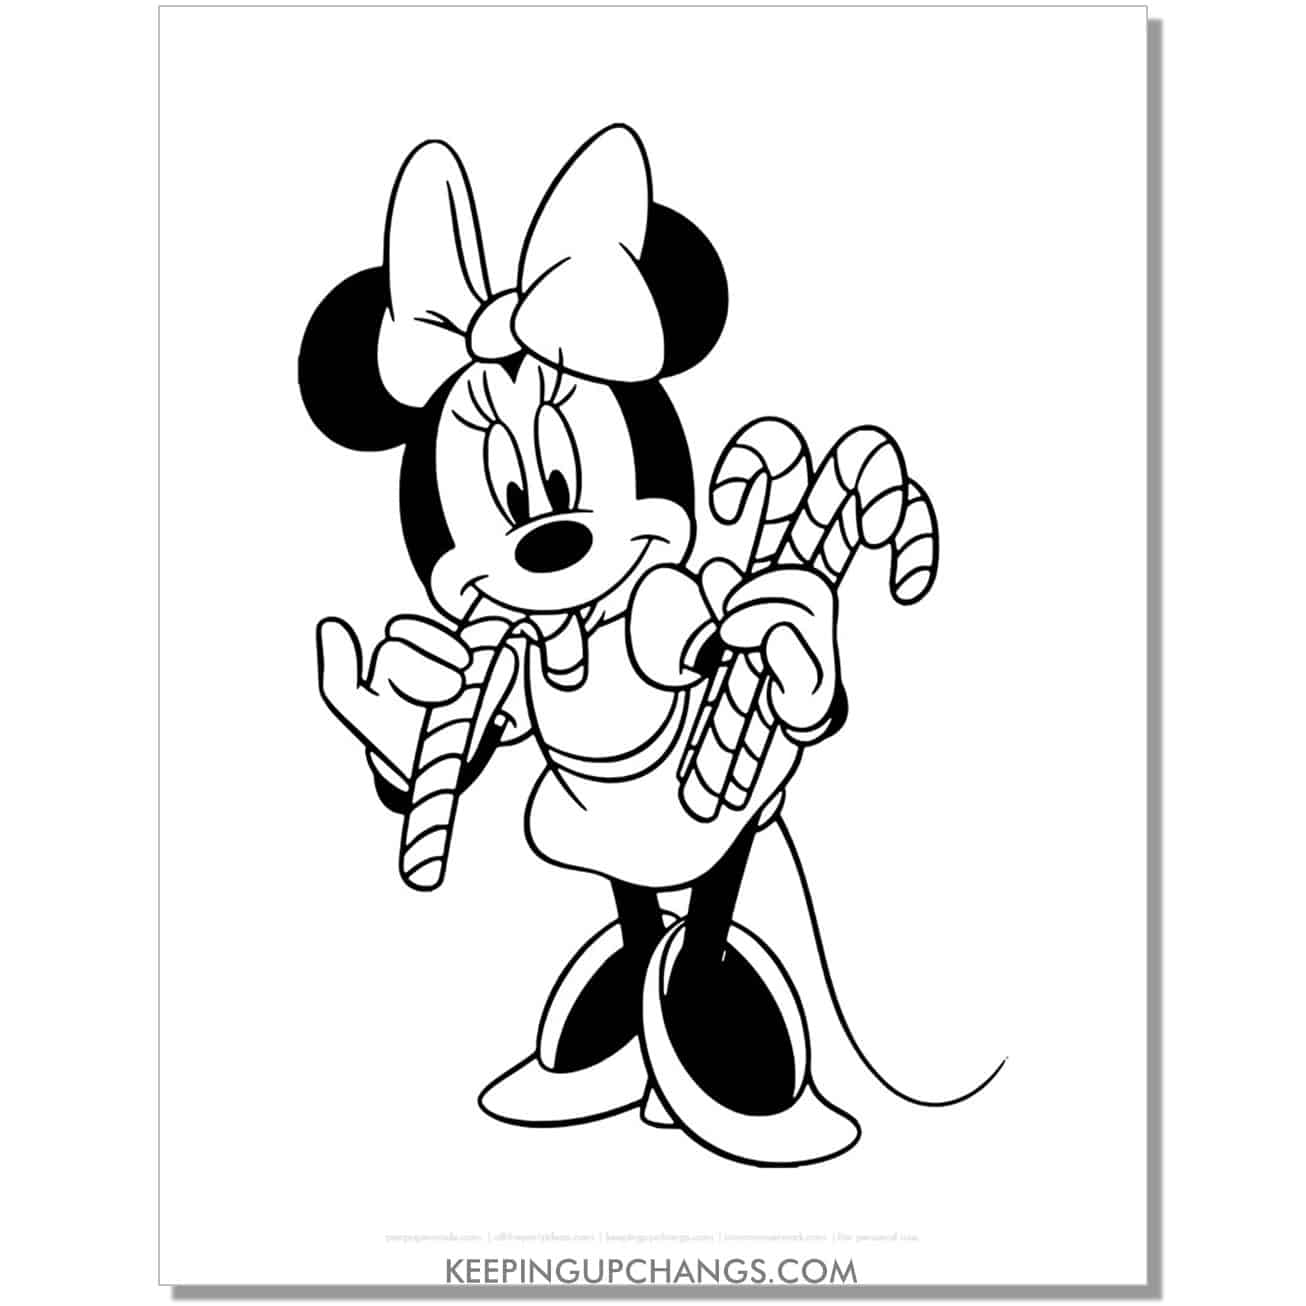 free minnie mouse holding candy canes coloring page, sheet.